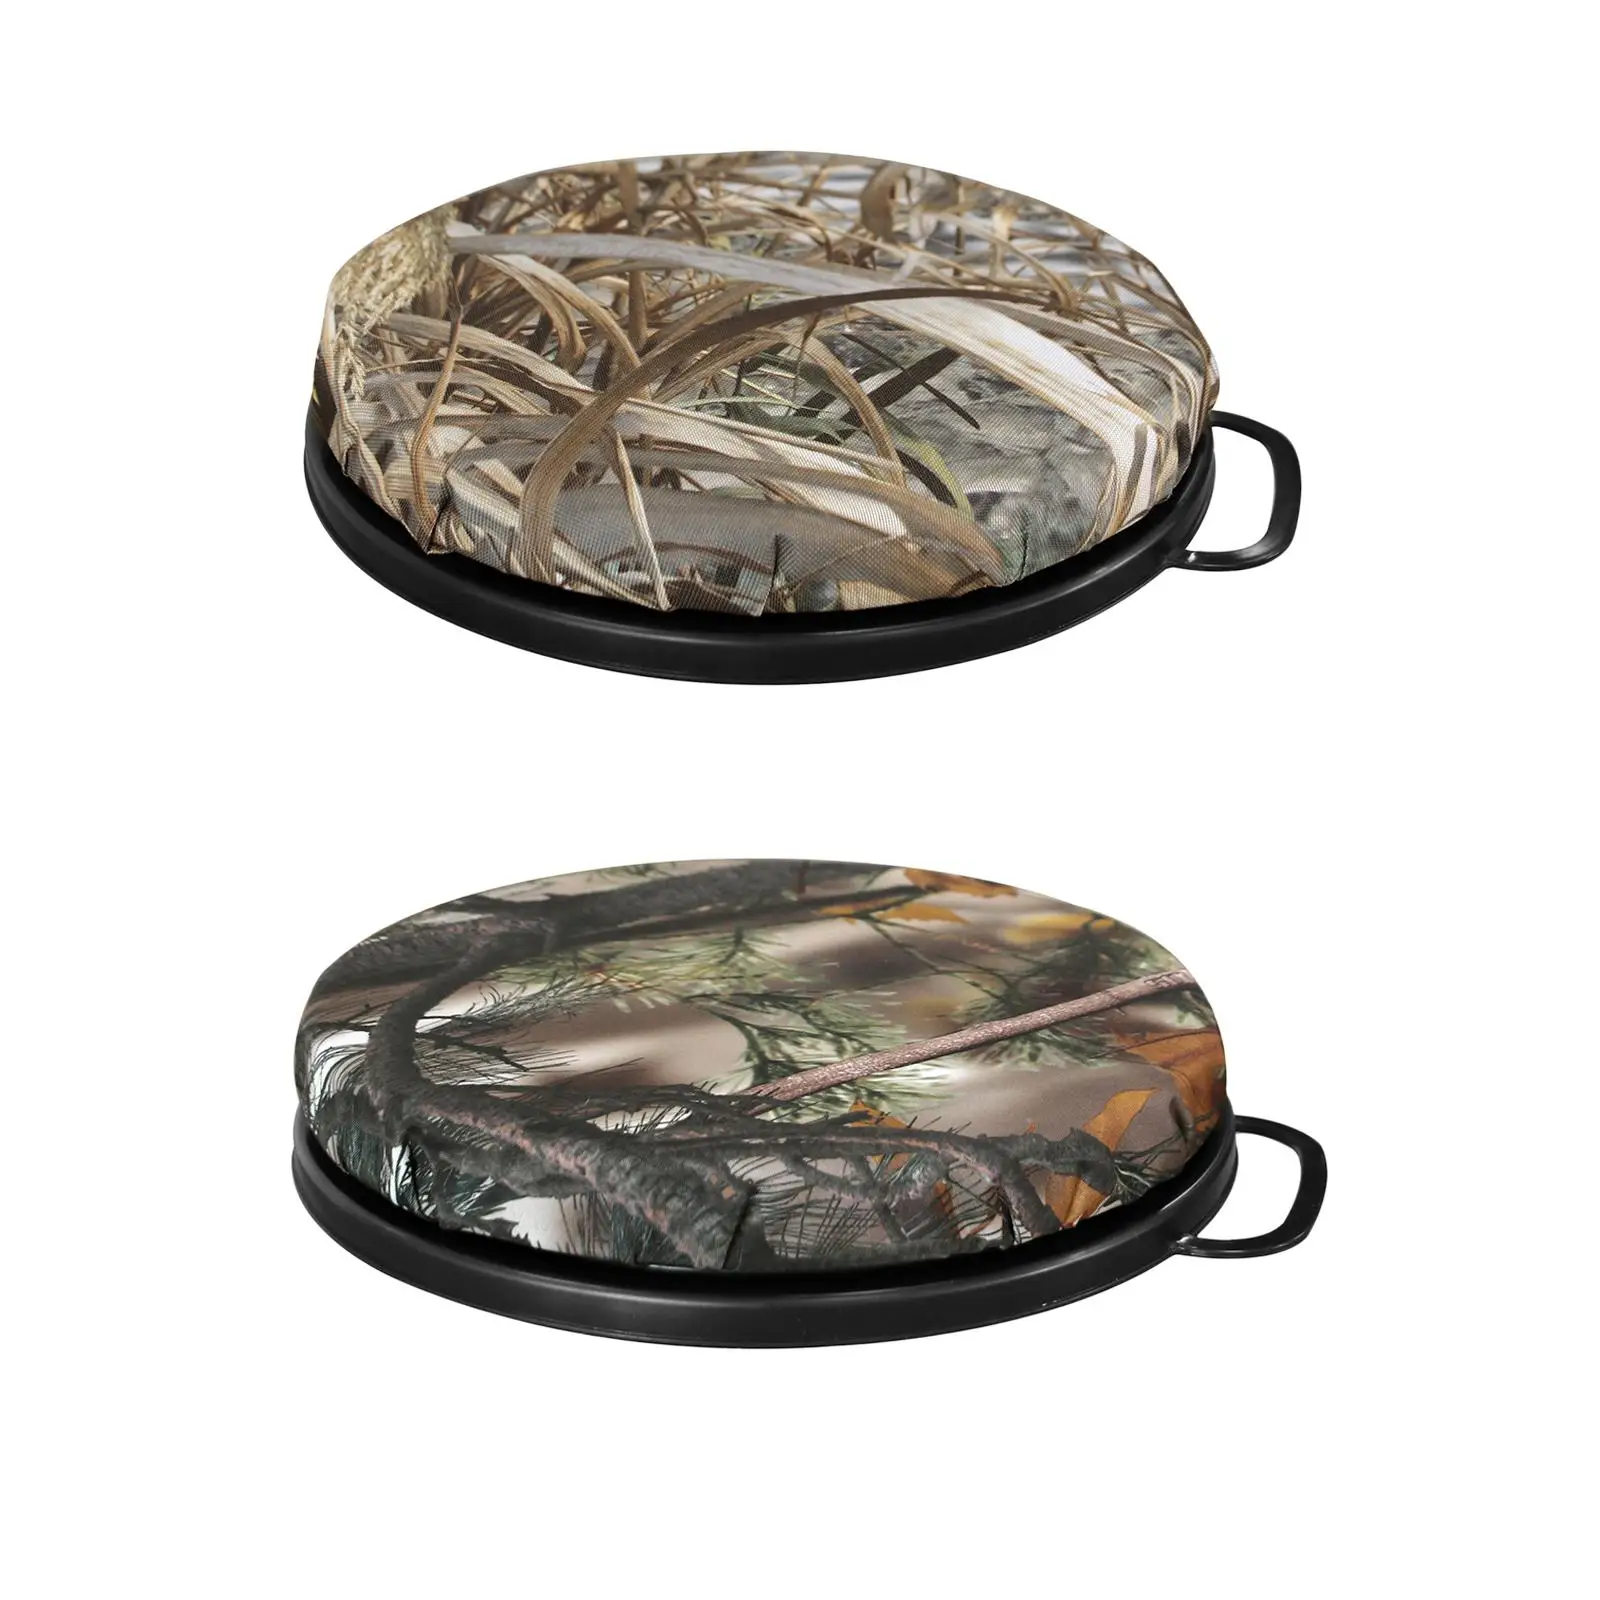 Hunting Seat Cushion Water Resistant with Handle Oxford Cloth Lightweight Pad 5 gallons Bucket Mat for Outdoor Fishing Equipment